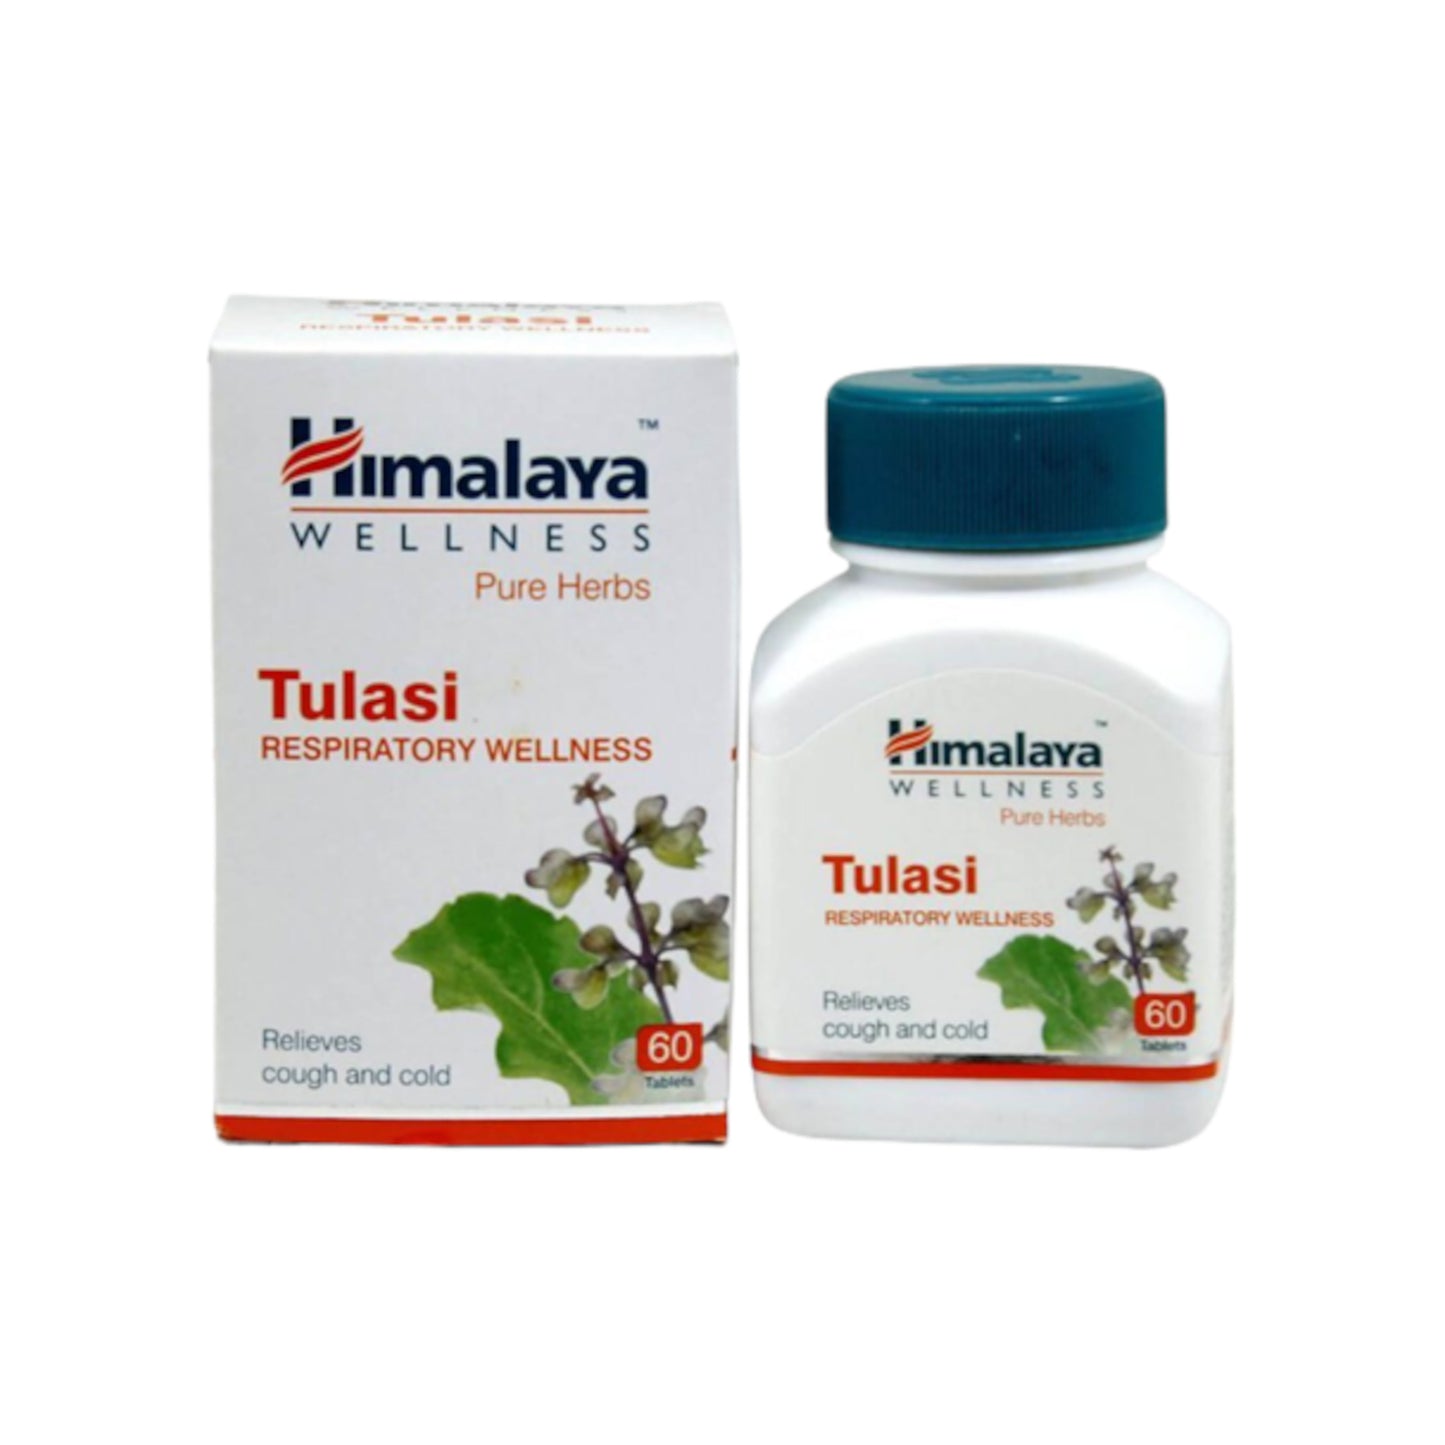 Image: Himalaya Tulasi 60 Tablets - Supports well-being, boosts the immune system, and aids respiratory health.